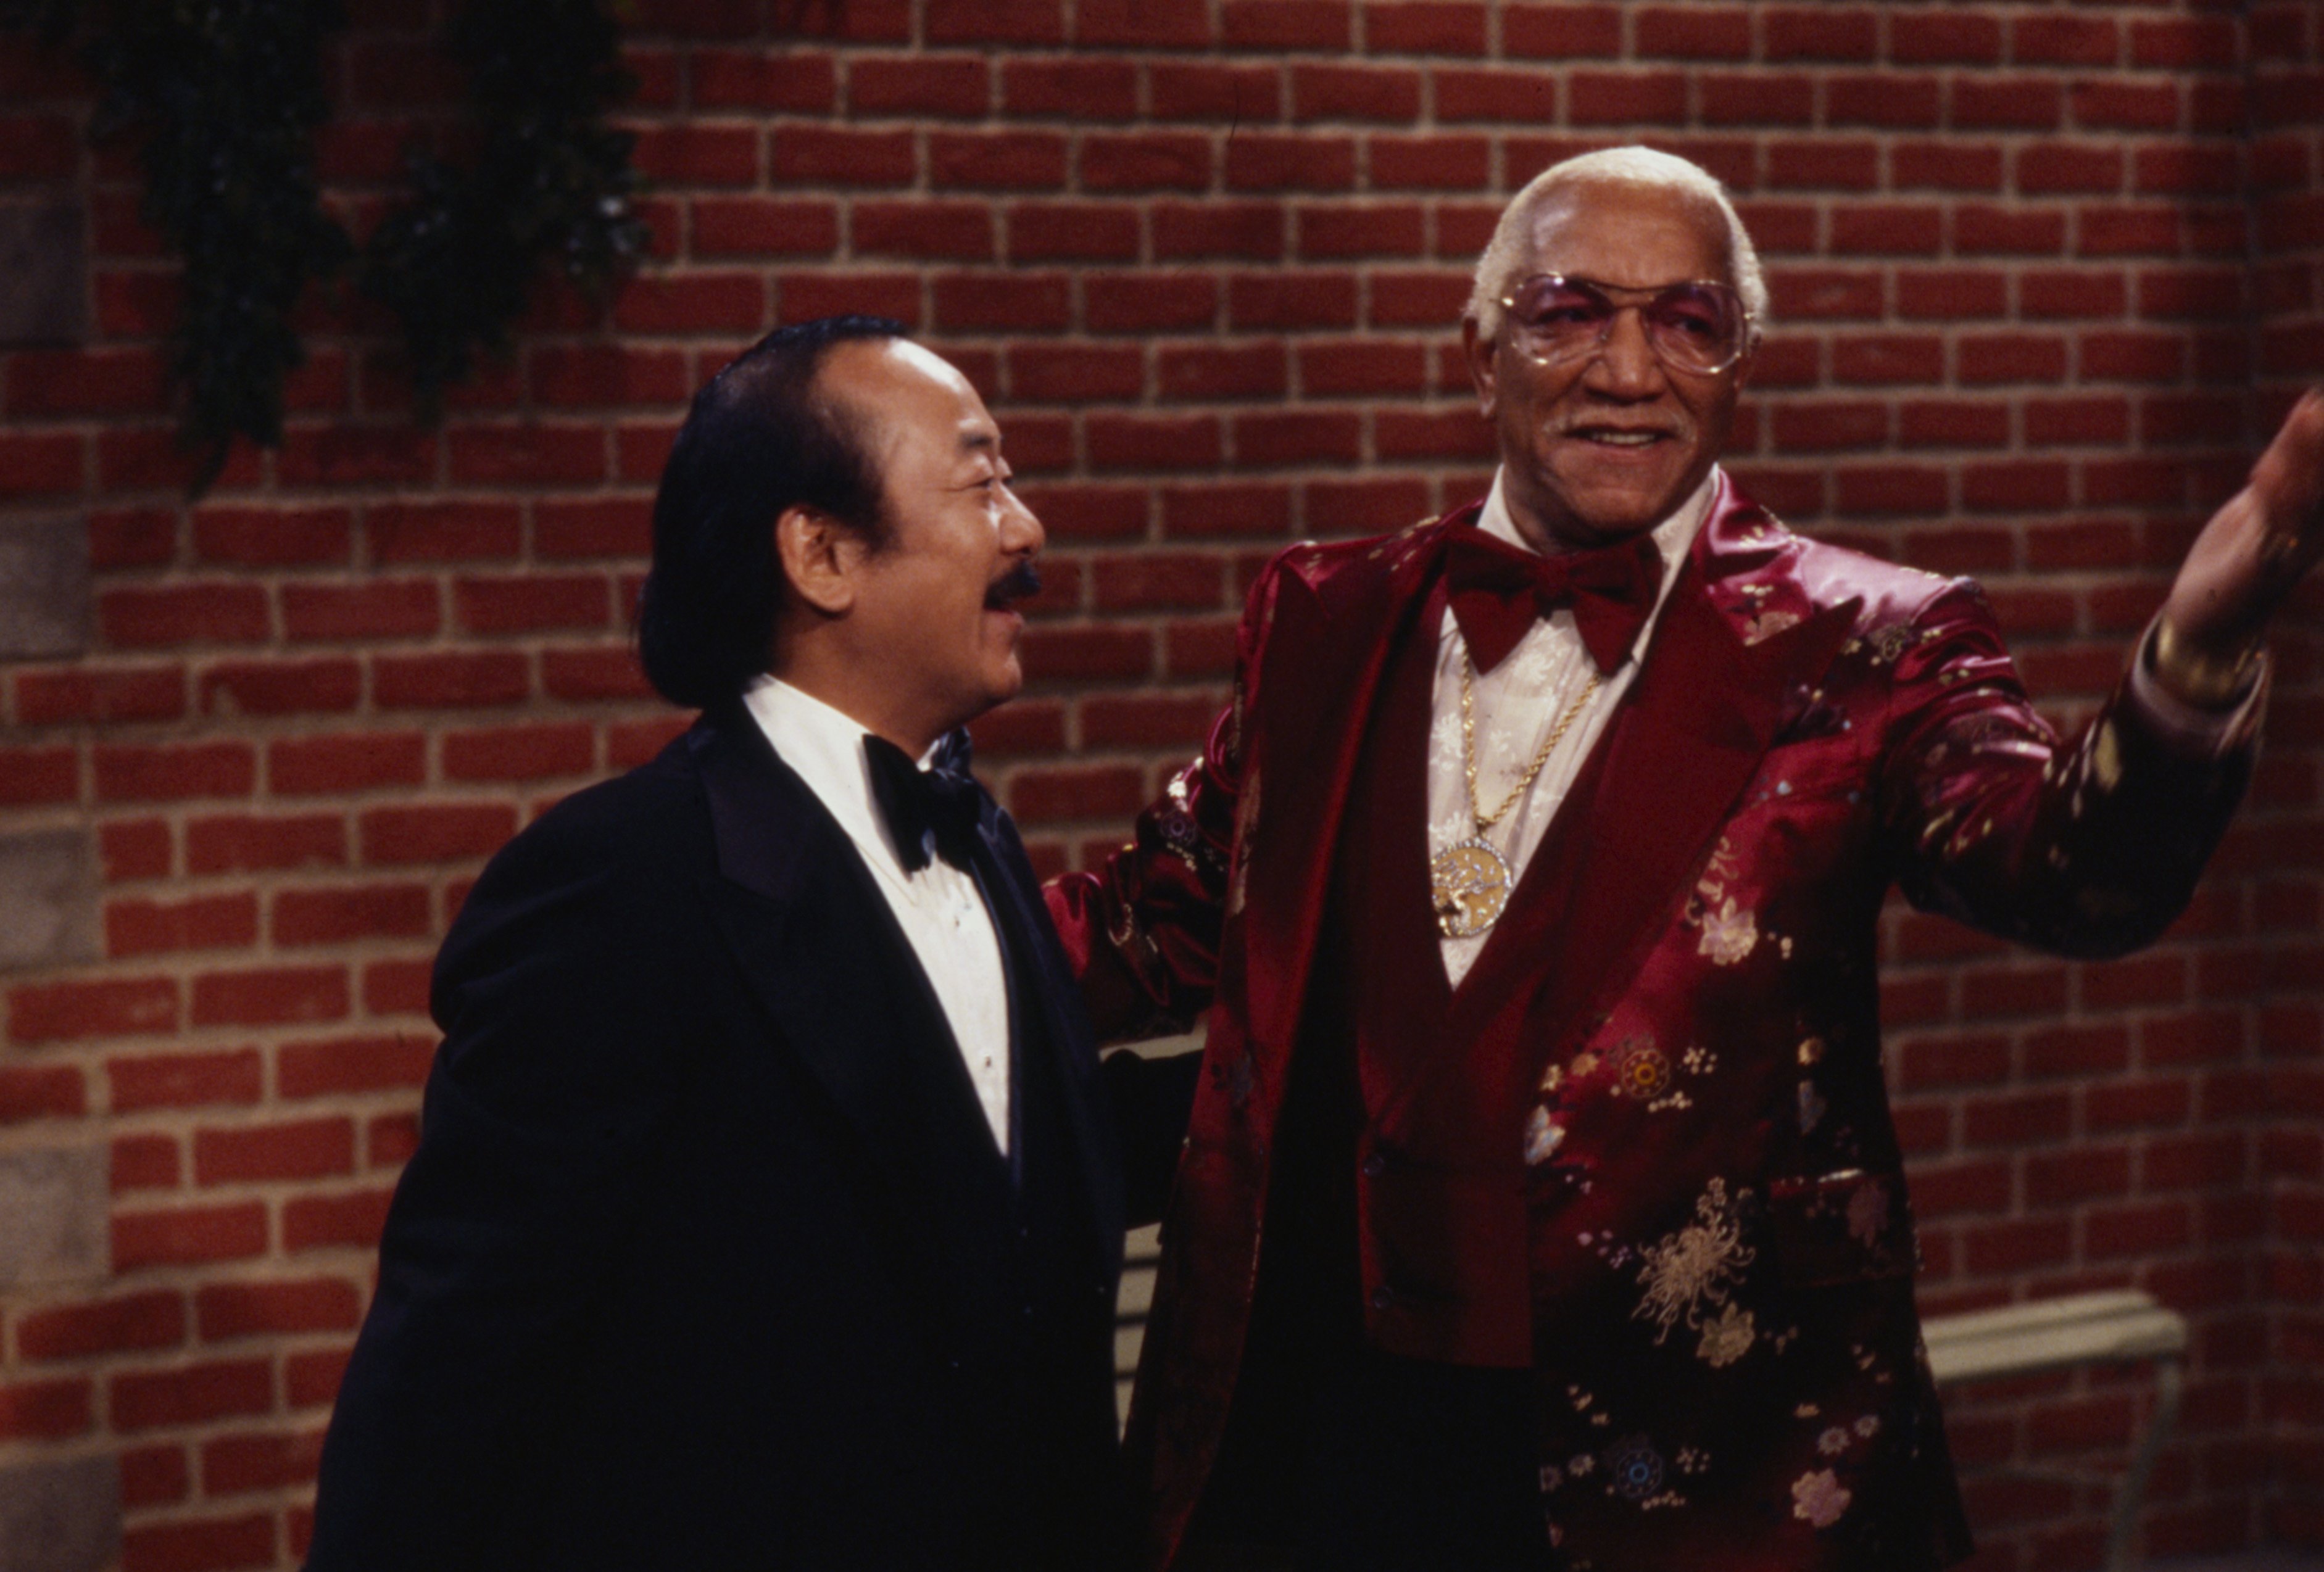 Pat Morita and fellow comedian Redd Foxx appearing in a sketch on the ABC TV series "The Redd Foxx Comedy Hour," in 1977. / Source: Getty Images